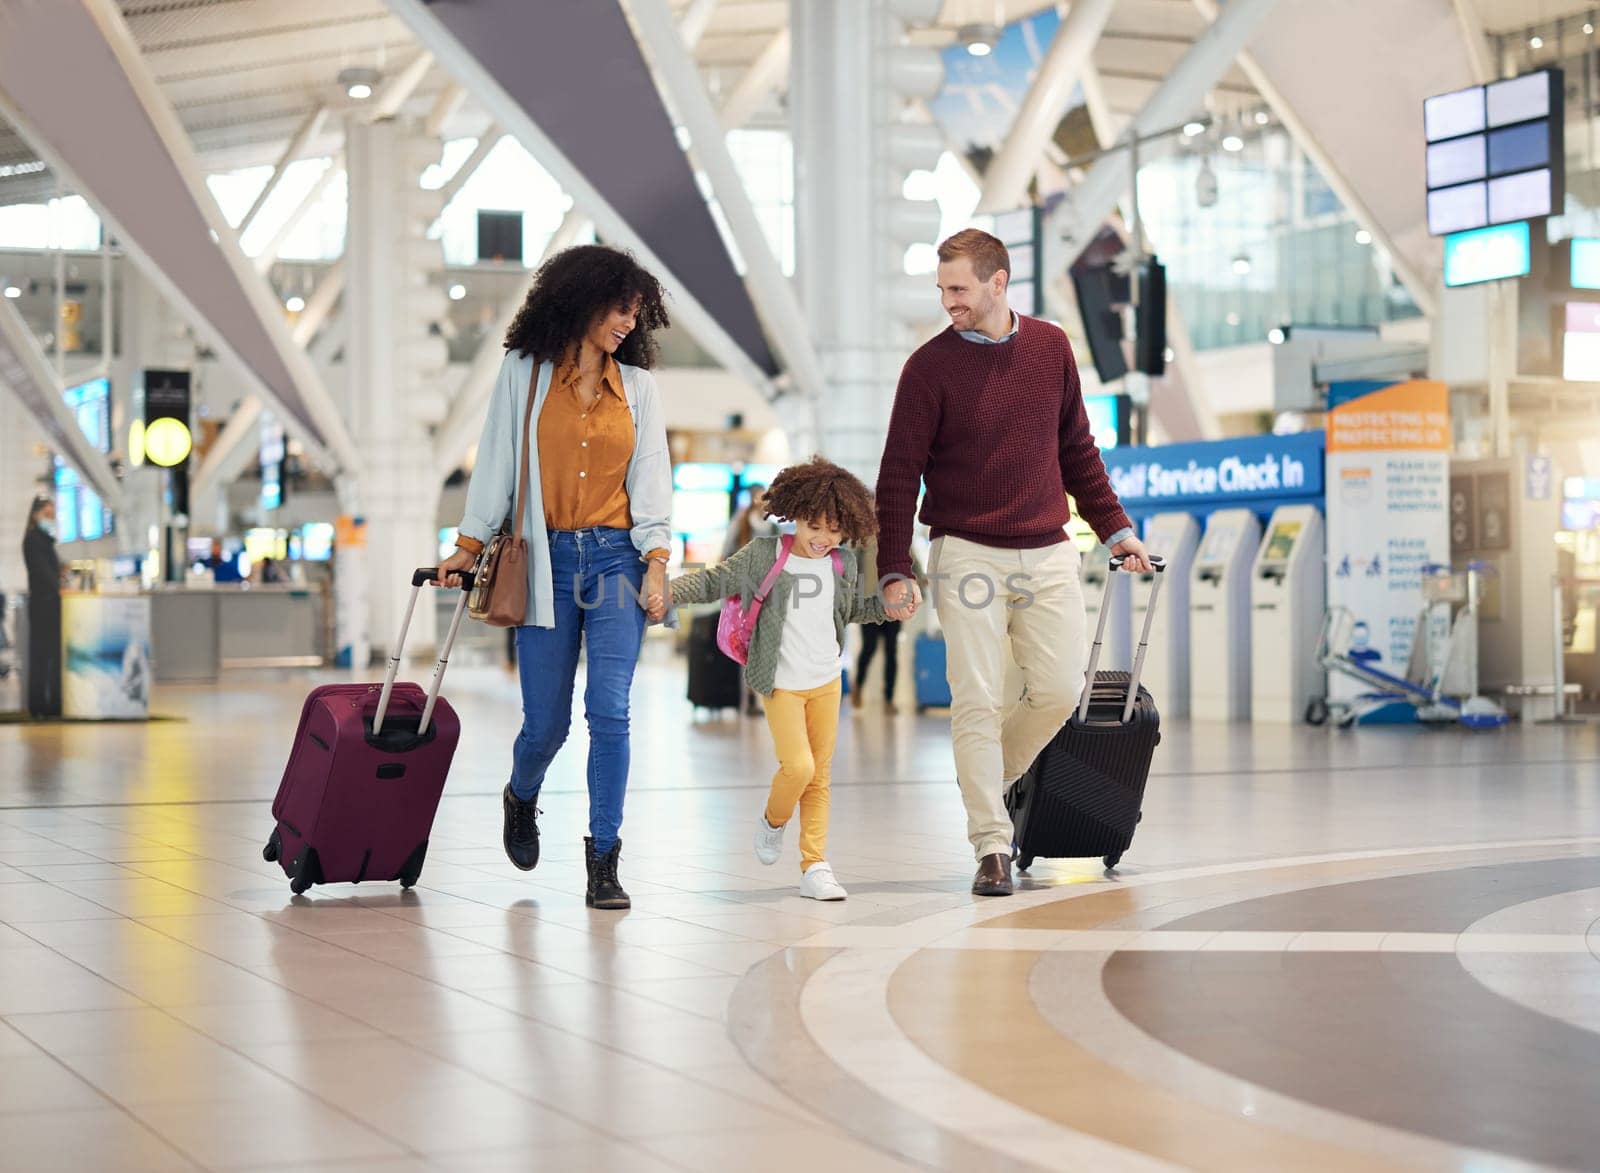 Family, holding hands at airport and travel with suitcase parents and child walking, ready for vacation and flight. Trust, adventure and people together at airline, transportation and journey.